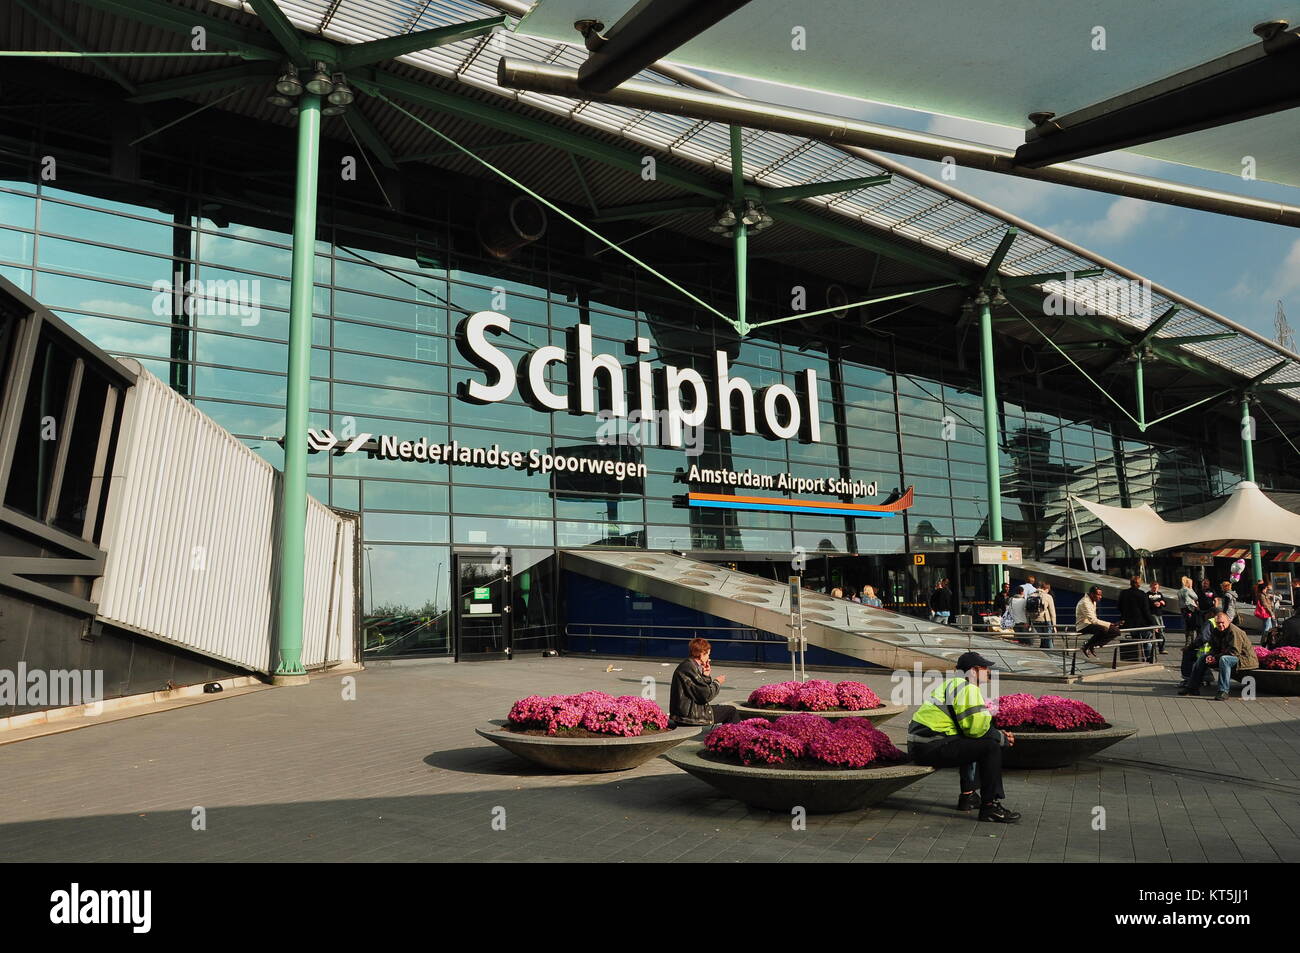 Schiphol airport entrance in Amsterdam Netherlands. People sitting outside Amsterdam's airport. Dutch airport in Amsterdam. Stock Photo